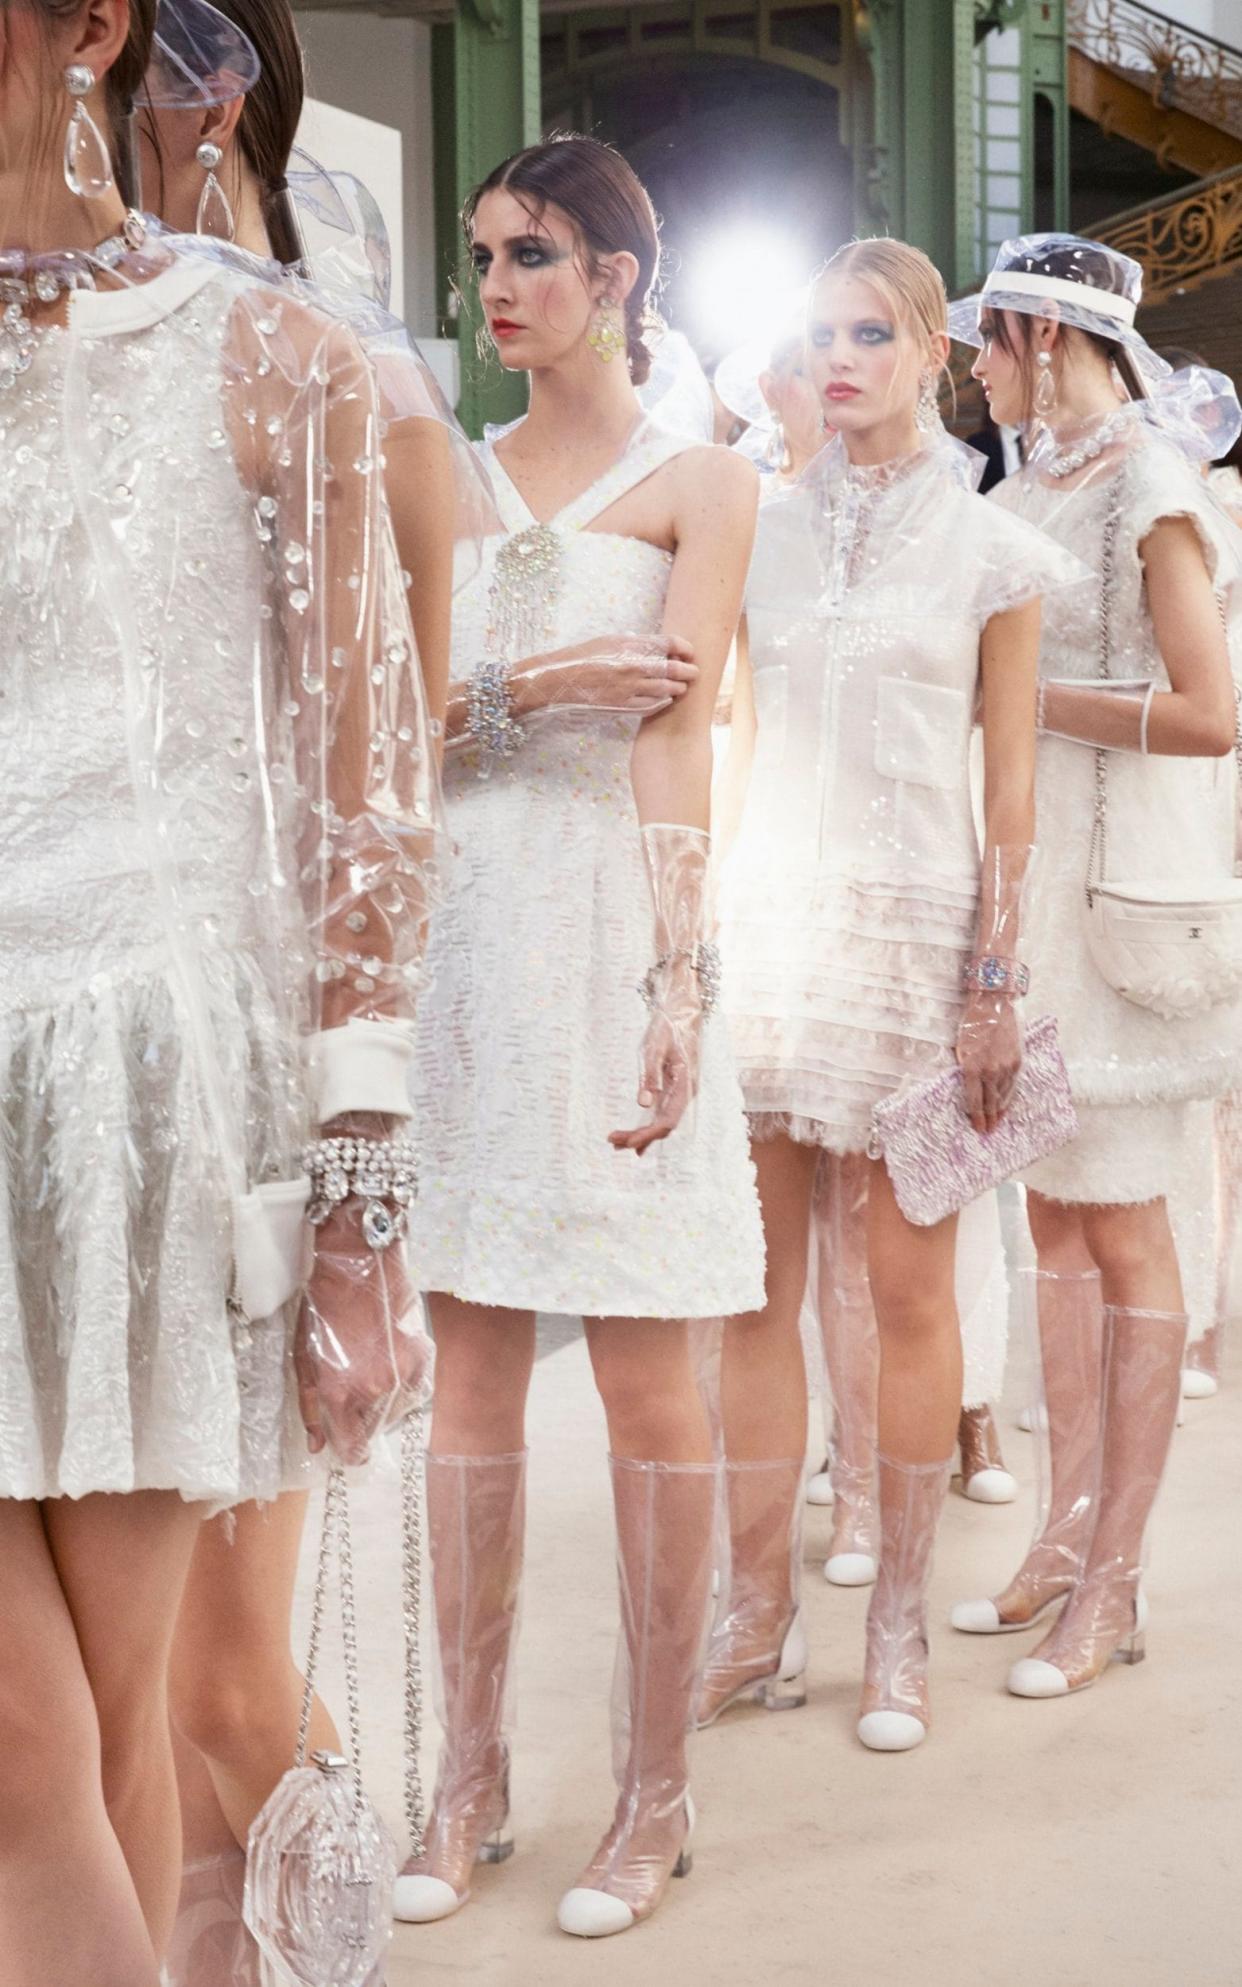 Backstage at Chanel's spring-summer 2018 show -  Chanel